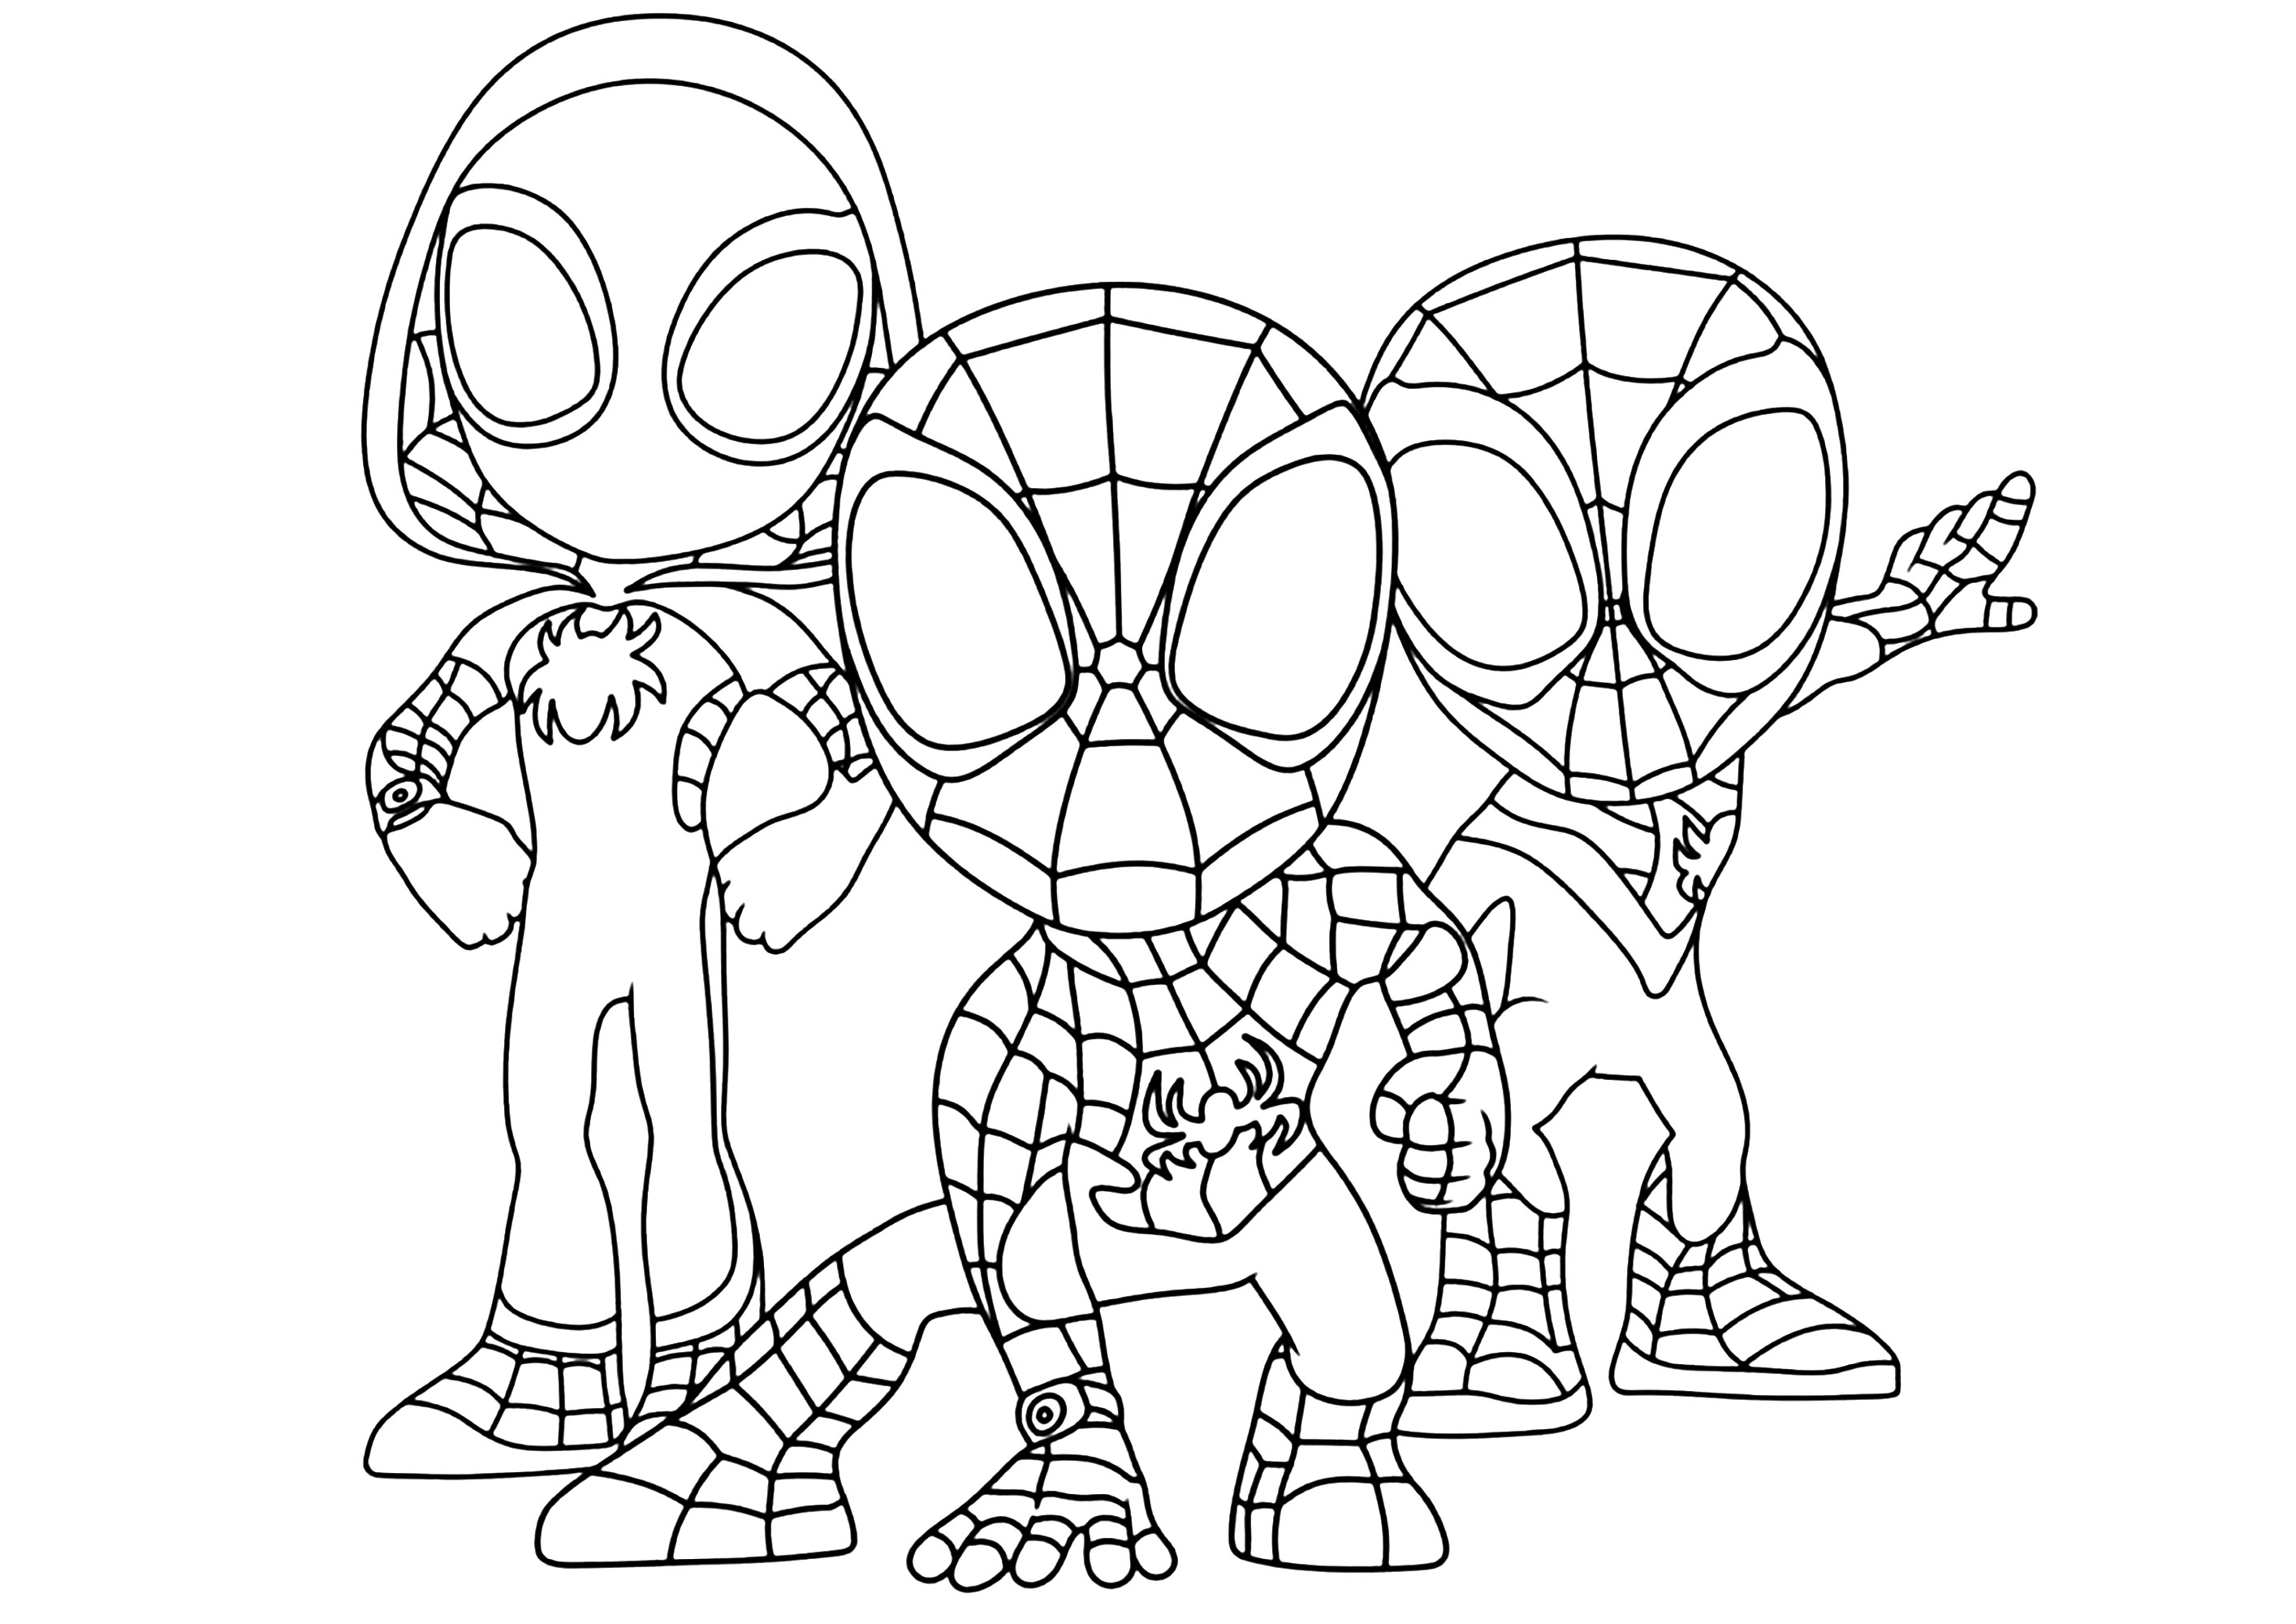 Spider-Man Into the Spider Verse characters in Kawaii mode. Spider-Gwen and the two versions of Spider-Man (Mike Morales and Peter Parker)